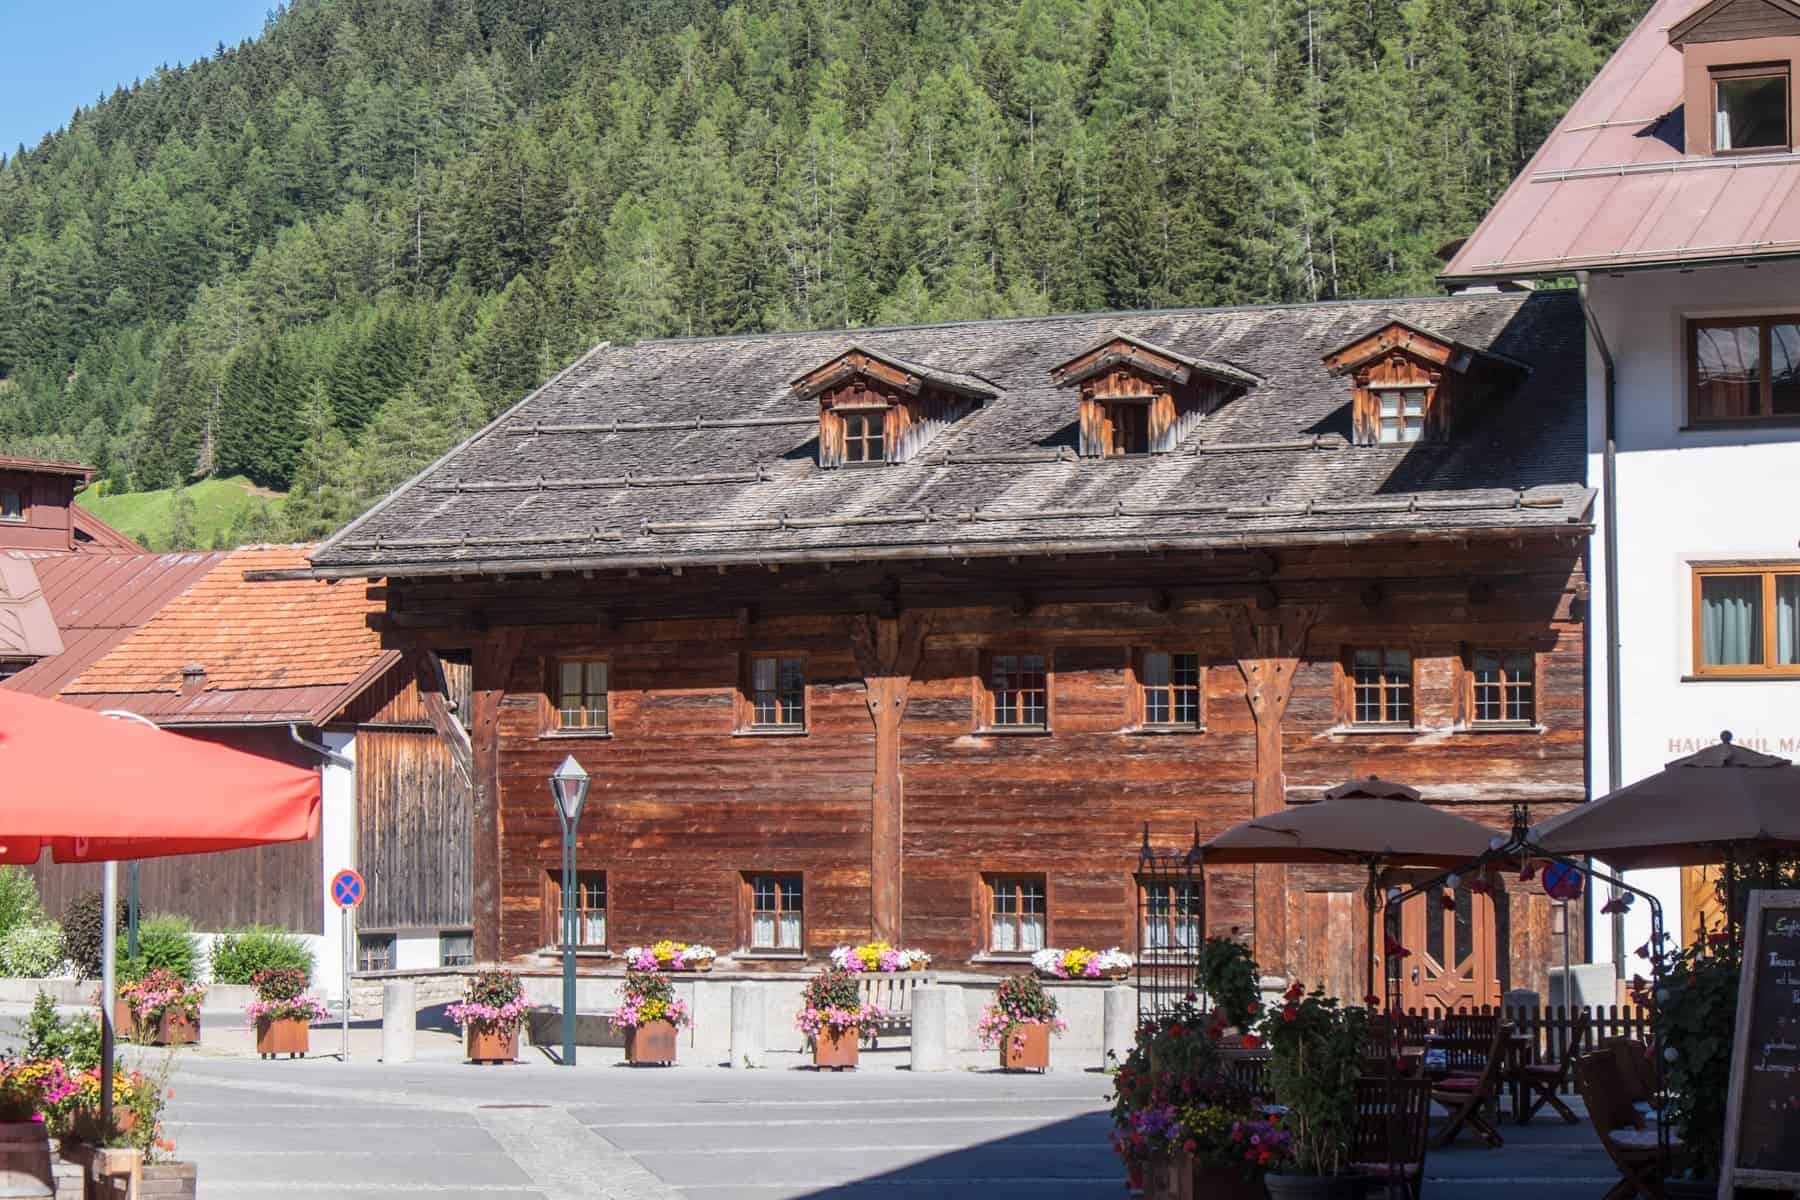 A long golden wood, traditional house that's the oldest house in St. Anton in Austria